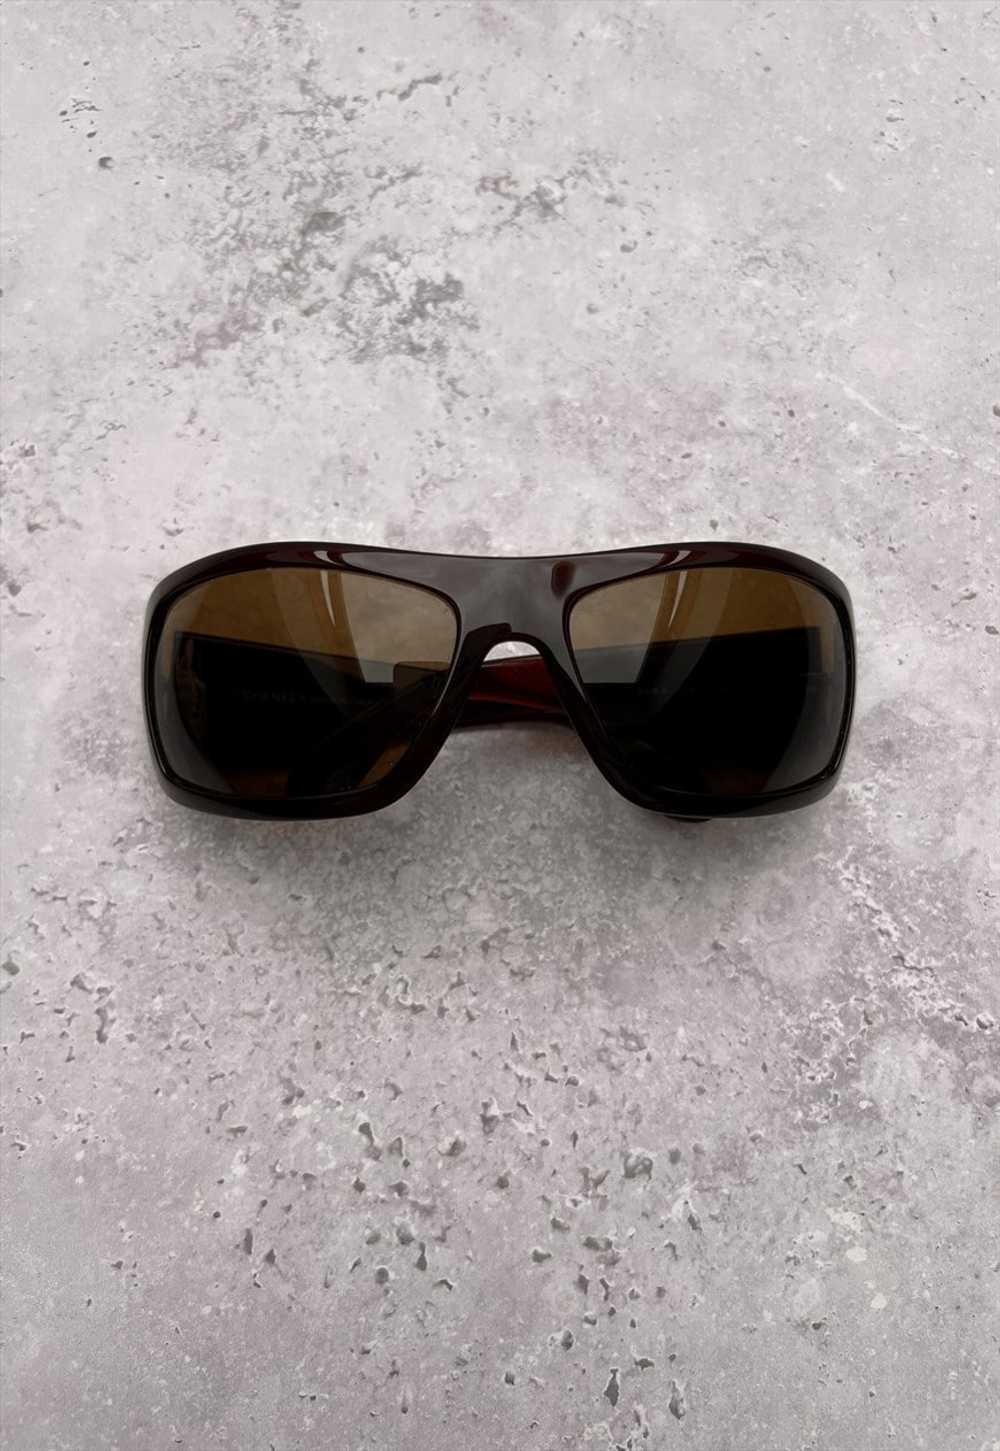 Chanel Sunglasses Authentic Burgundy Brown Crysta… - image 2